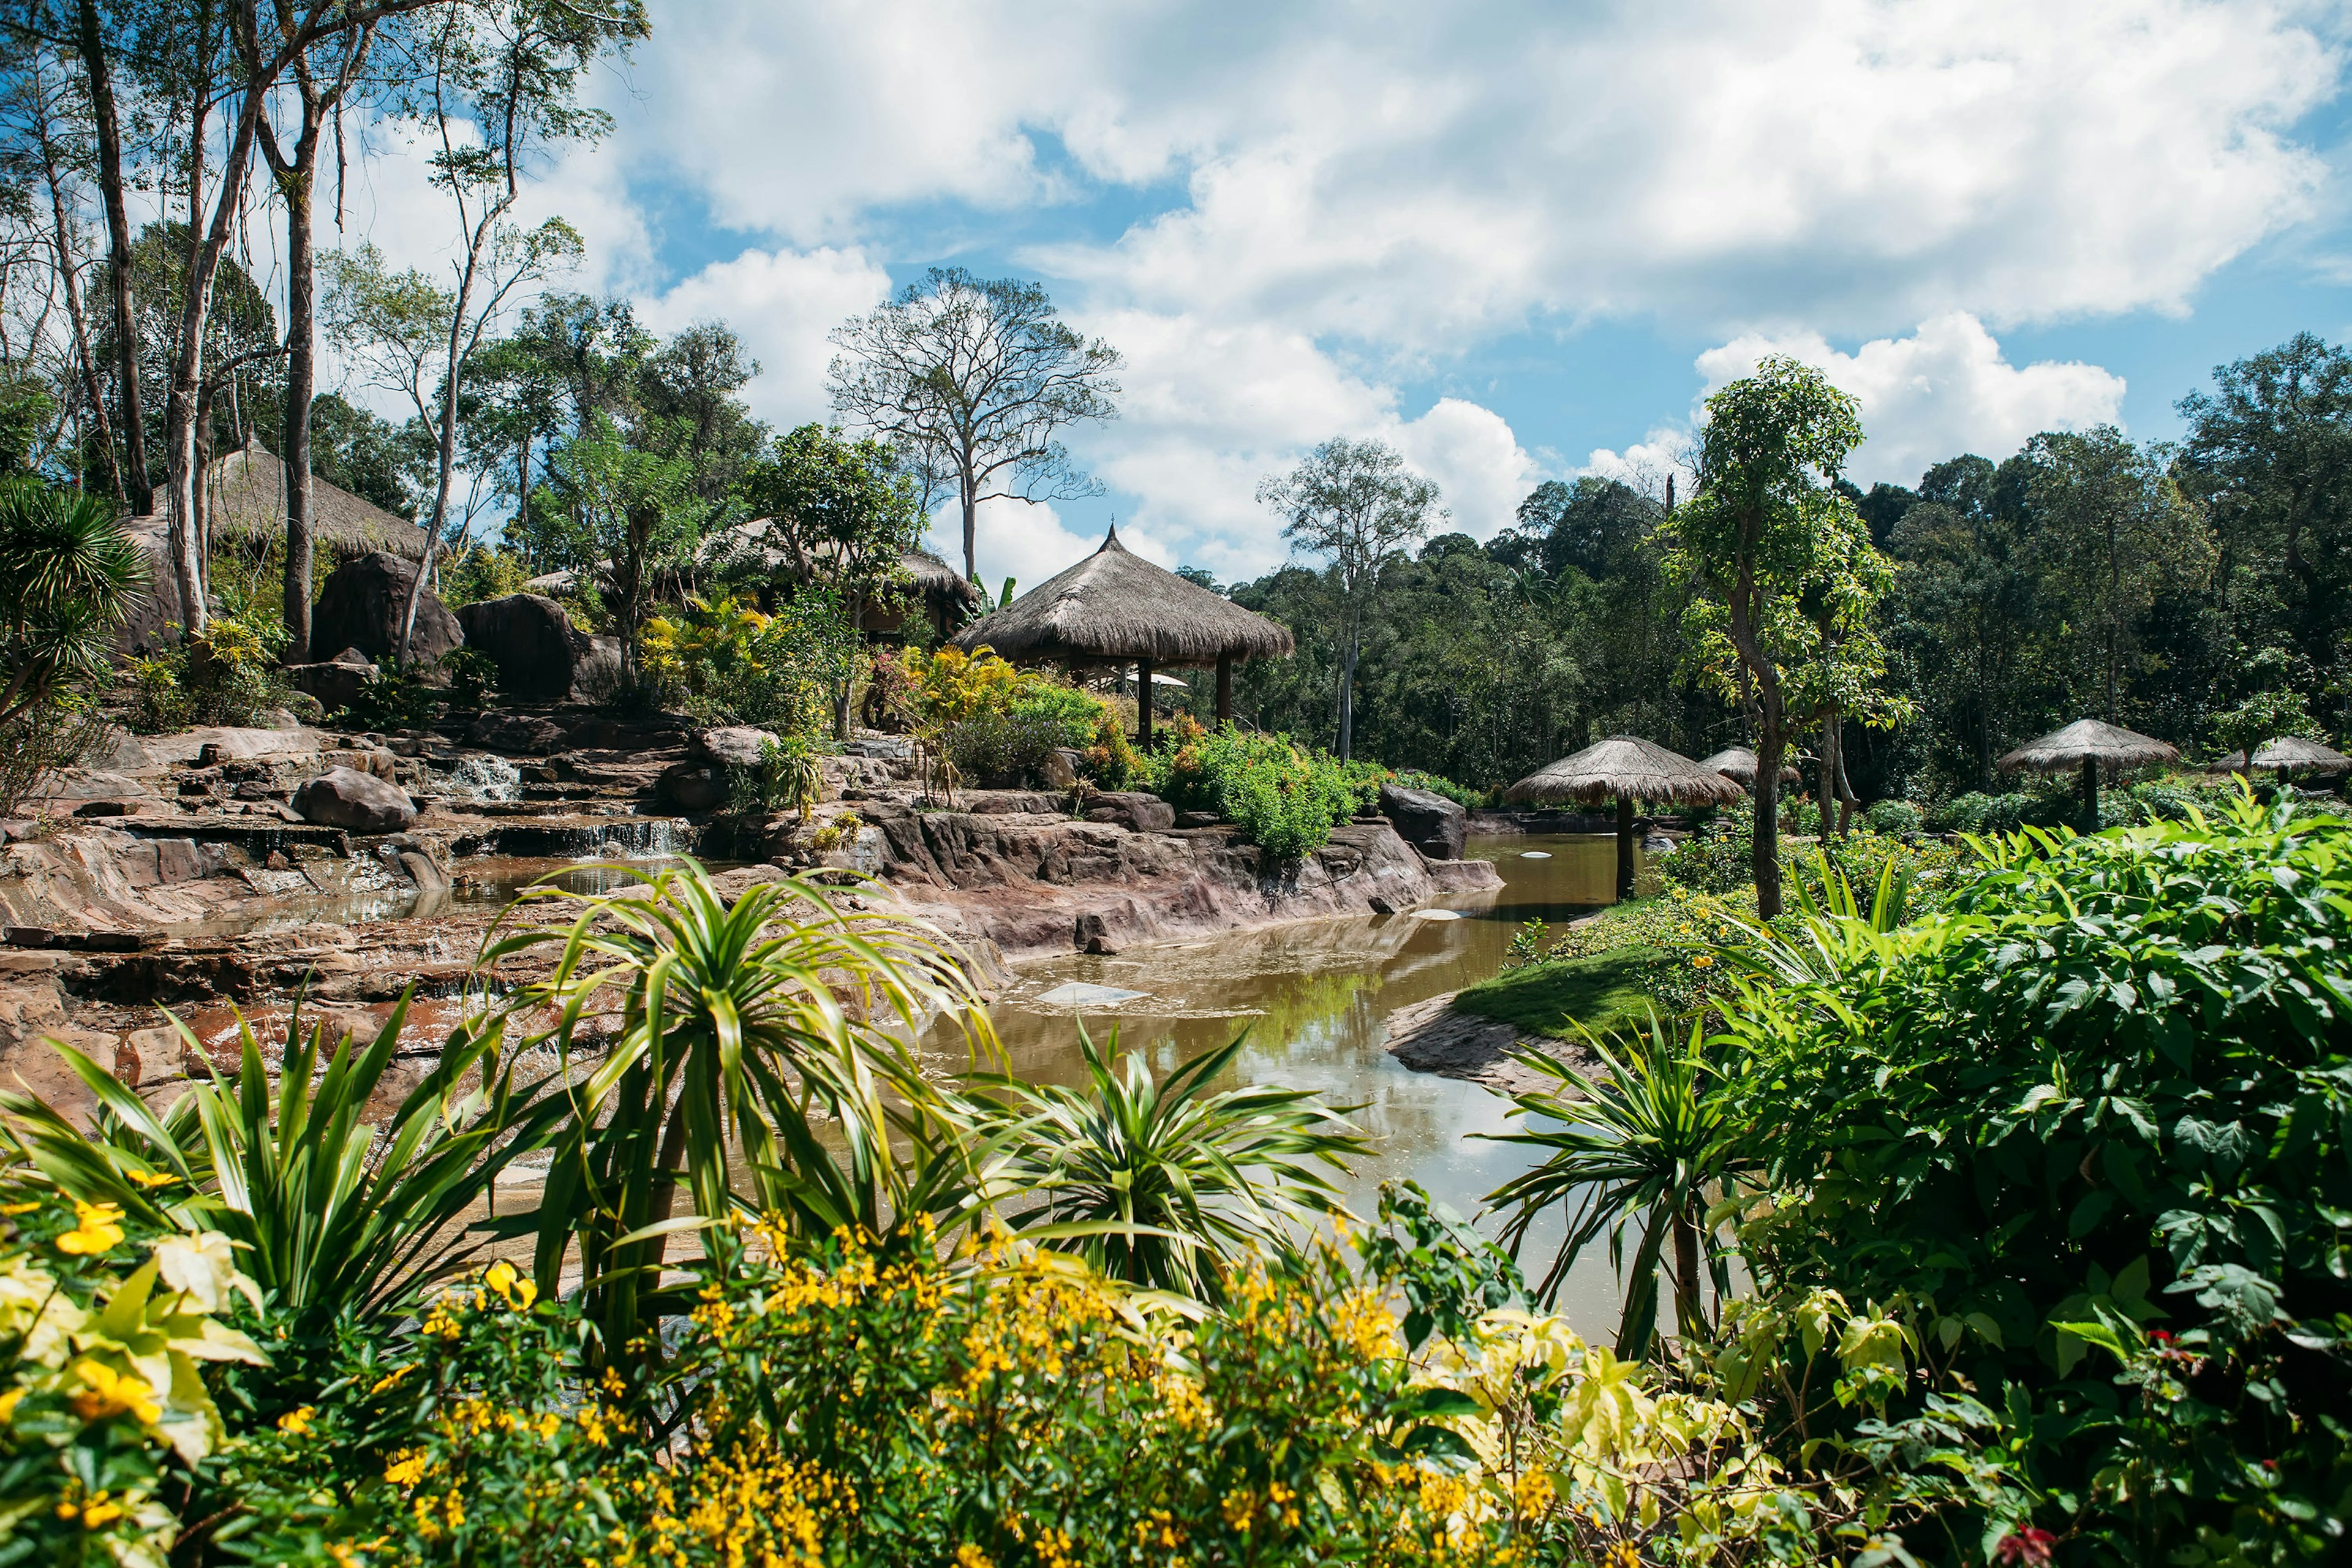 Jungle landscape with flowing water and small huts in Phu Quoc National Park.